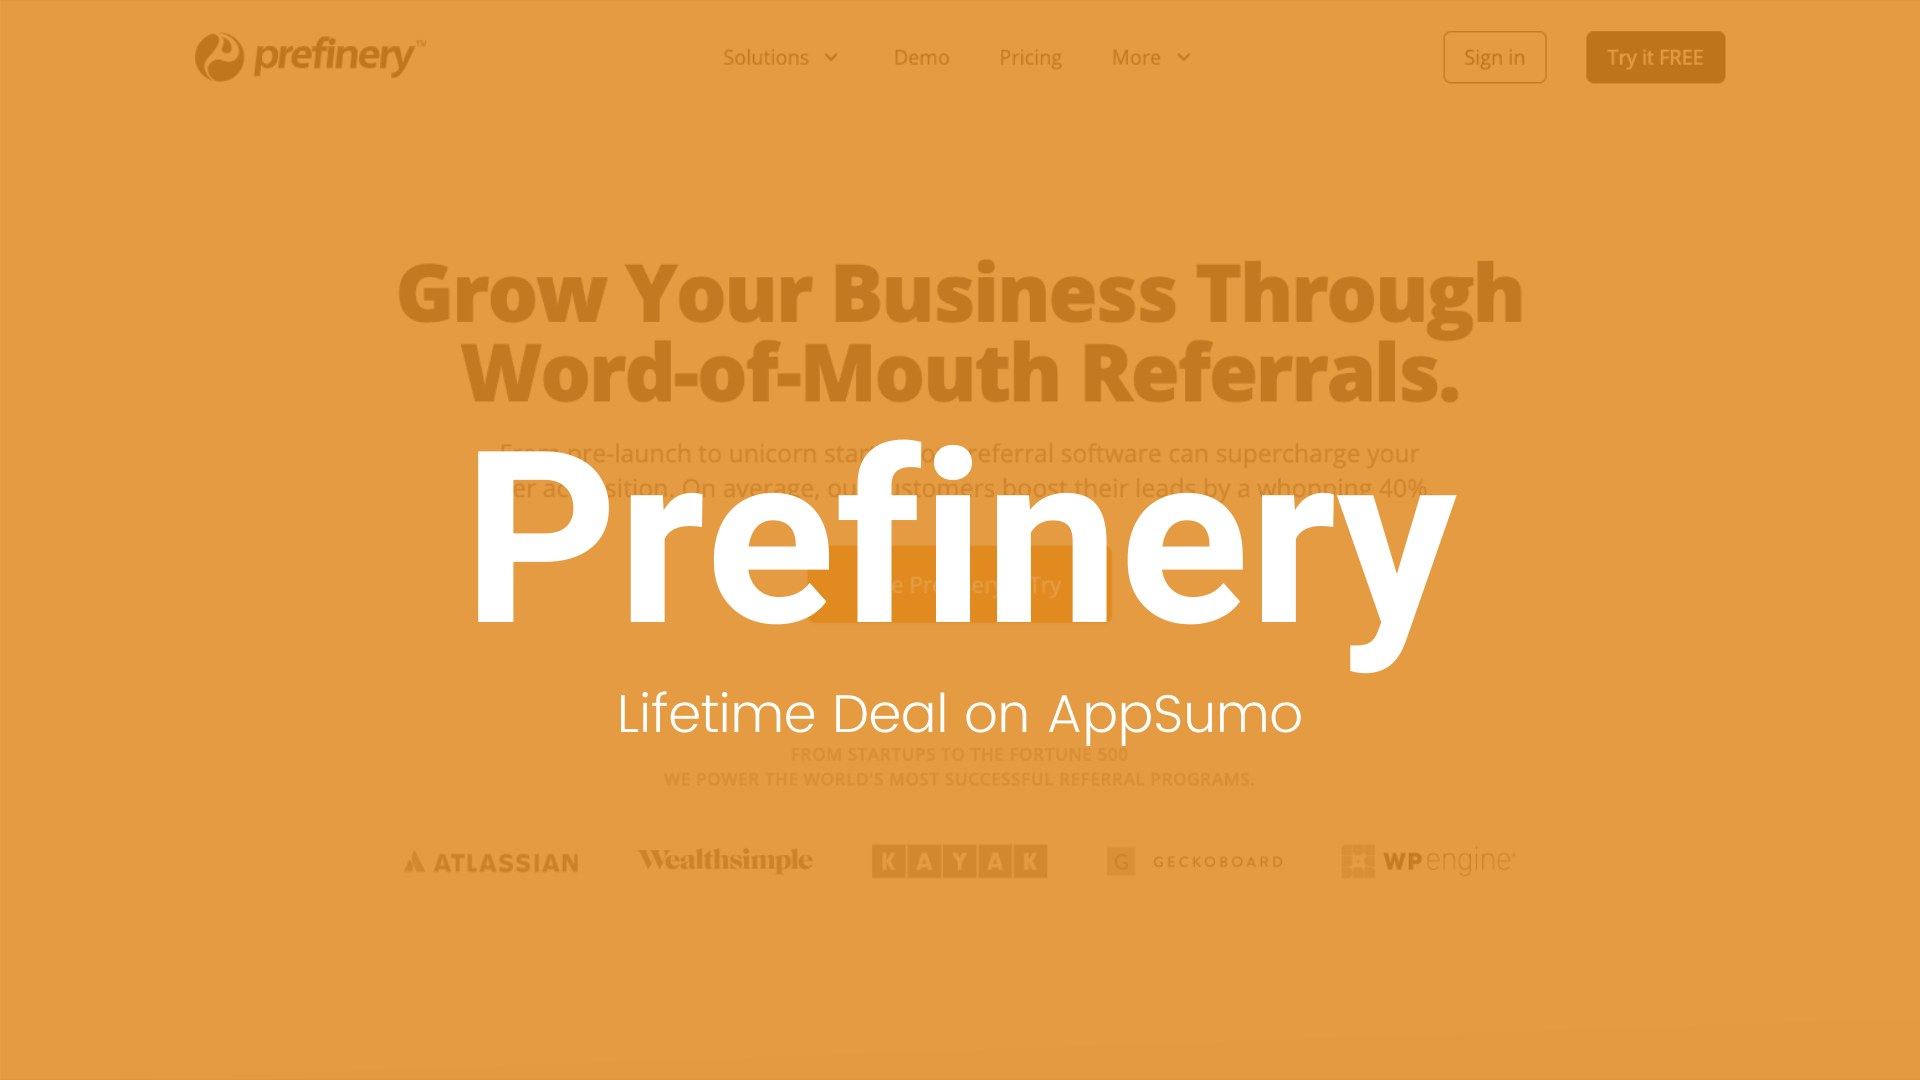 Prefinery: Viral Referral Links for Your Brand